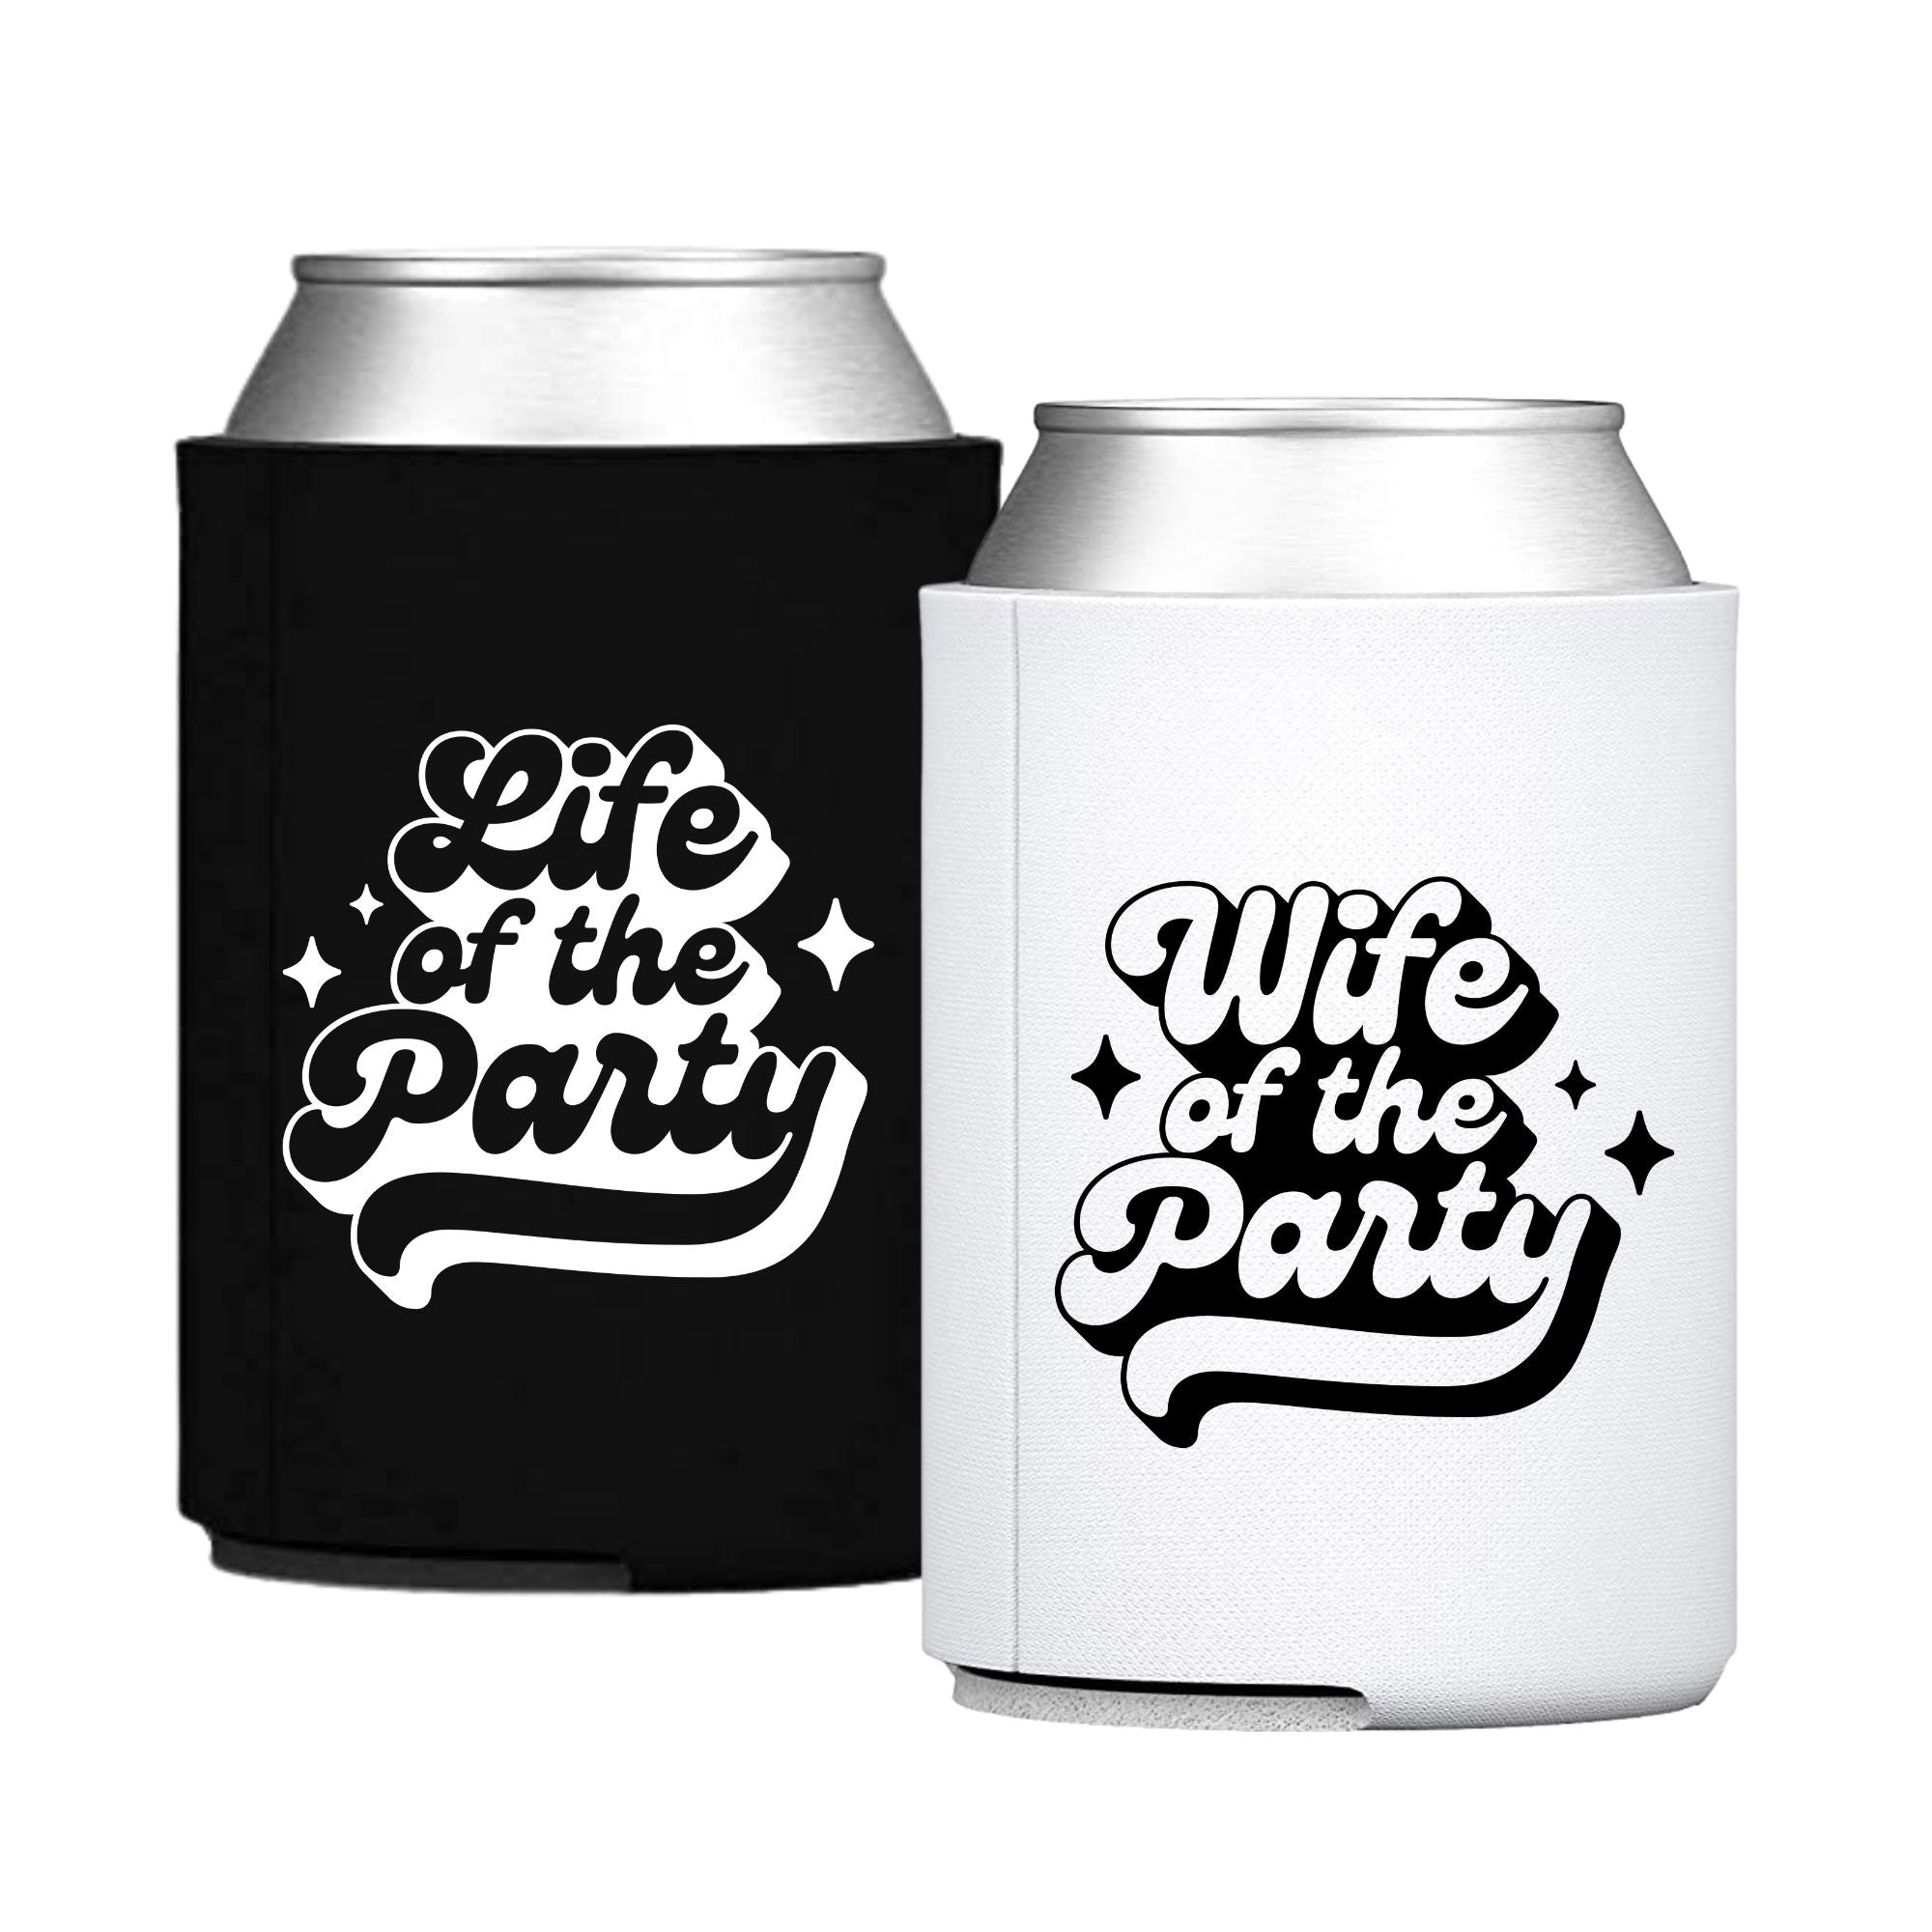 Wife of the Party / Life of the Party Can Cooler - Sprinkled With Pink #bachelorette #custom #gifts